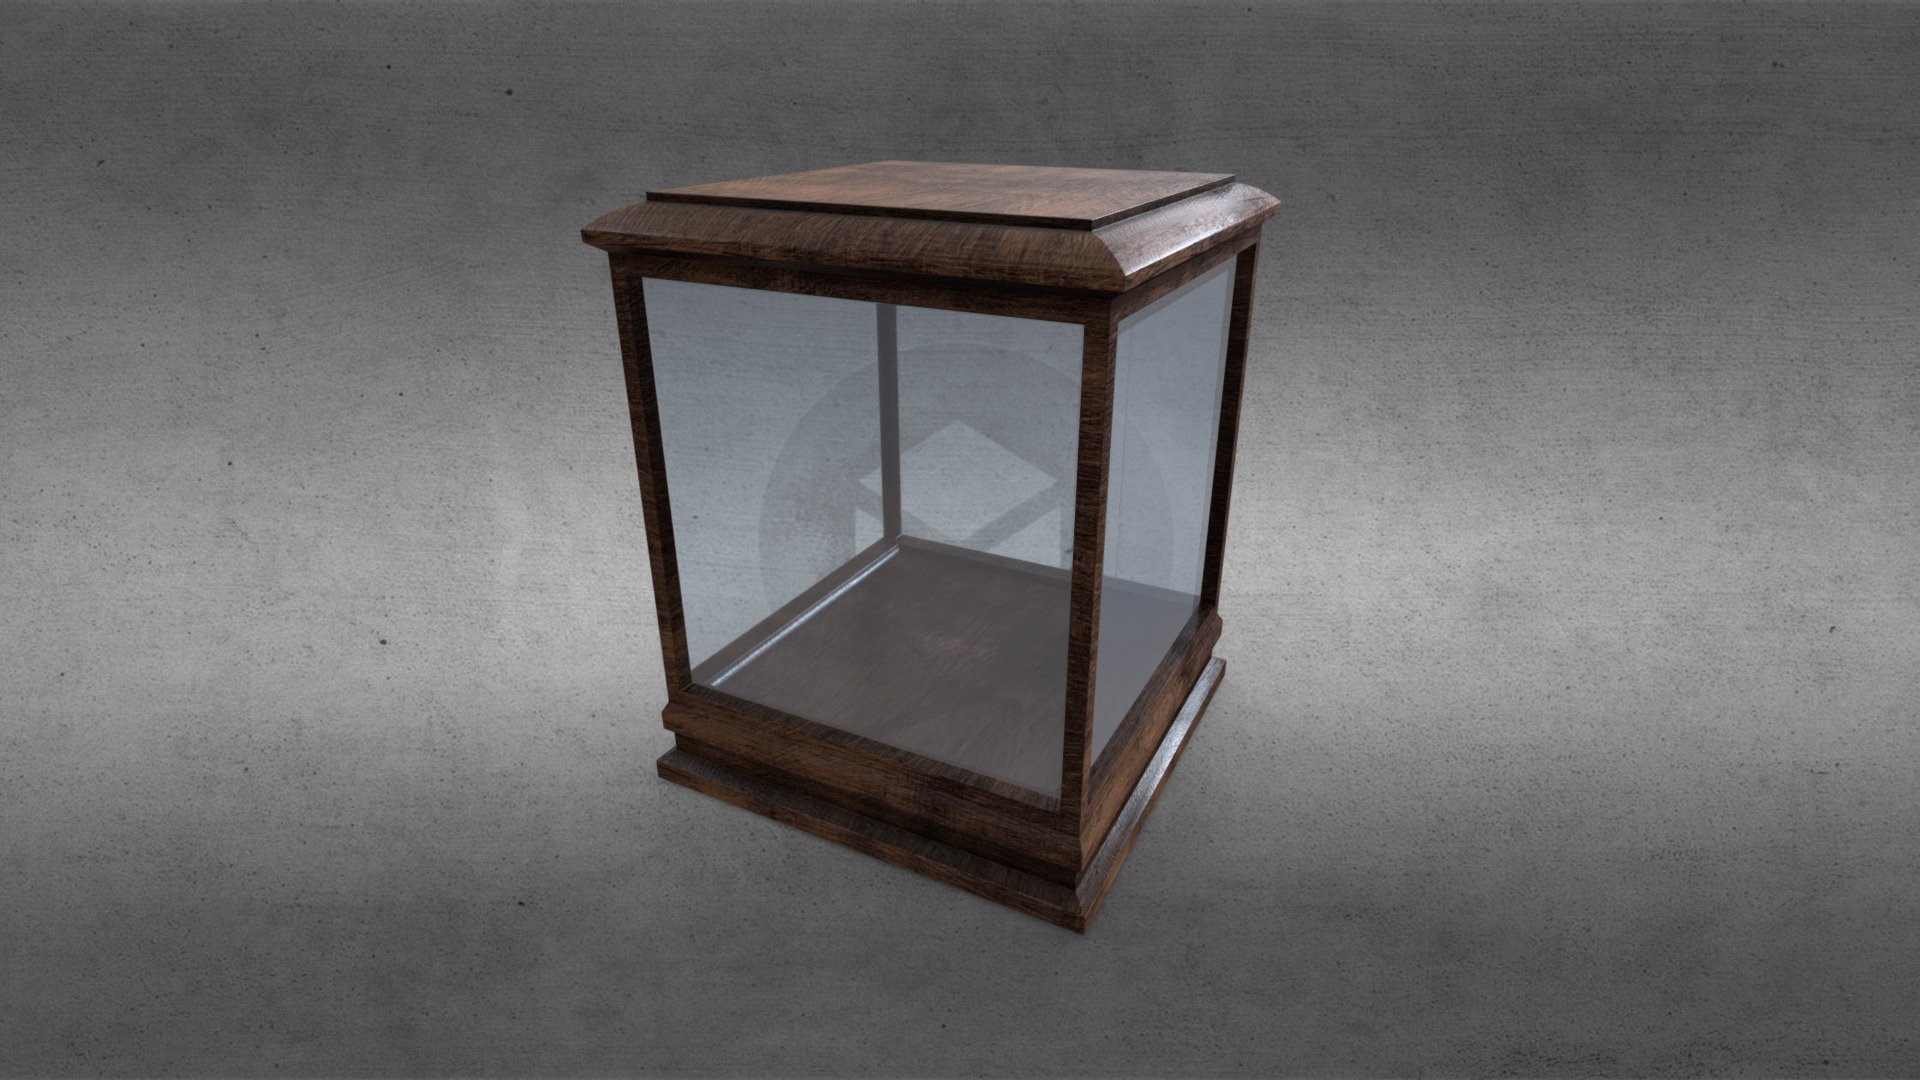 A classical simple Museum Showcase made by wood and glass. 

Material 2K (Color, Specular, Roughness, Normal) - Museum Showcase - Die Vitrine - Download Free 3D model by Samuel Francis Johnson (Oneironauticus) (@oneironauticus) 3d model